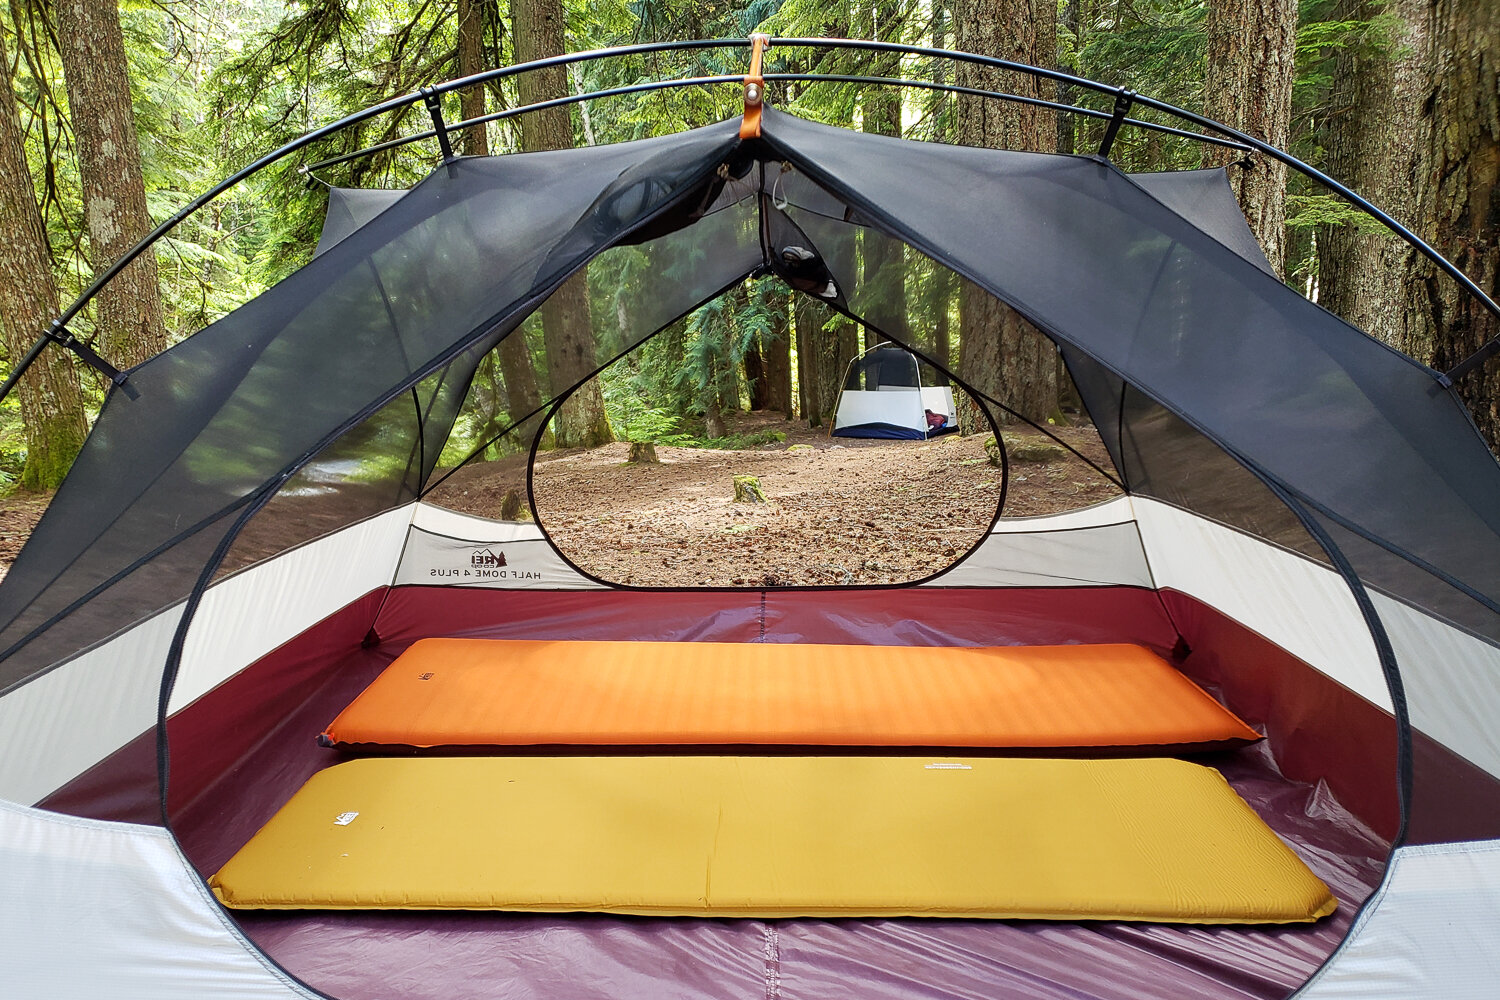 The REI Camp Bed and Groundbreaker sleeping pads are compact and affordable